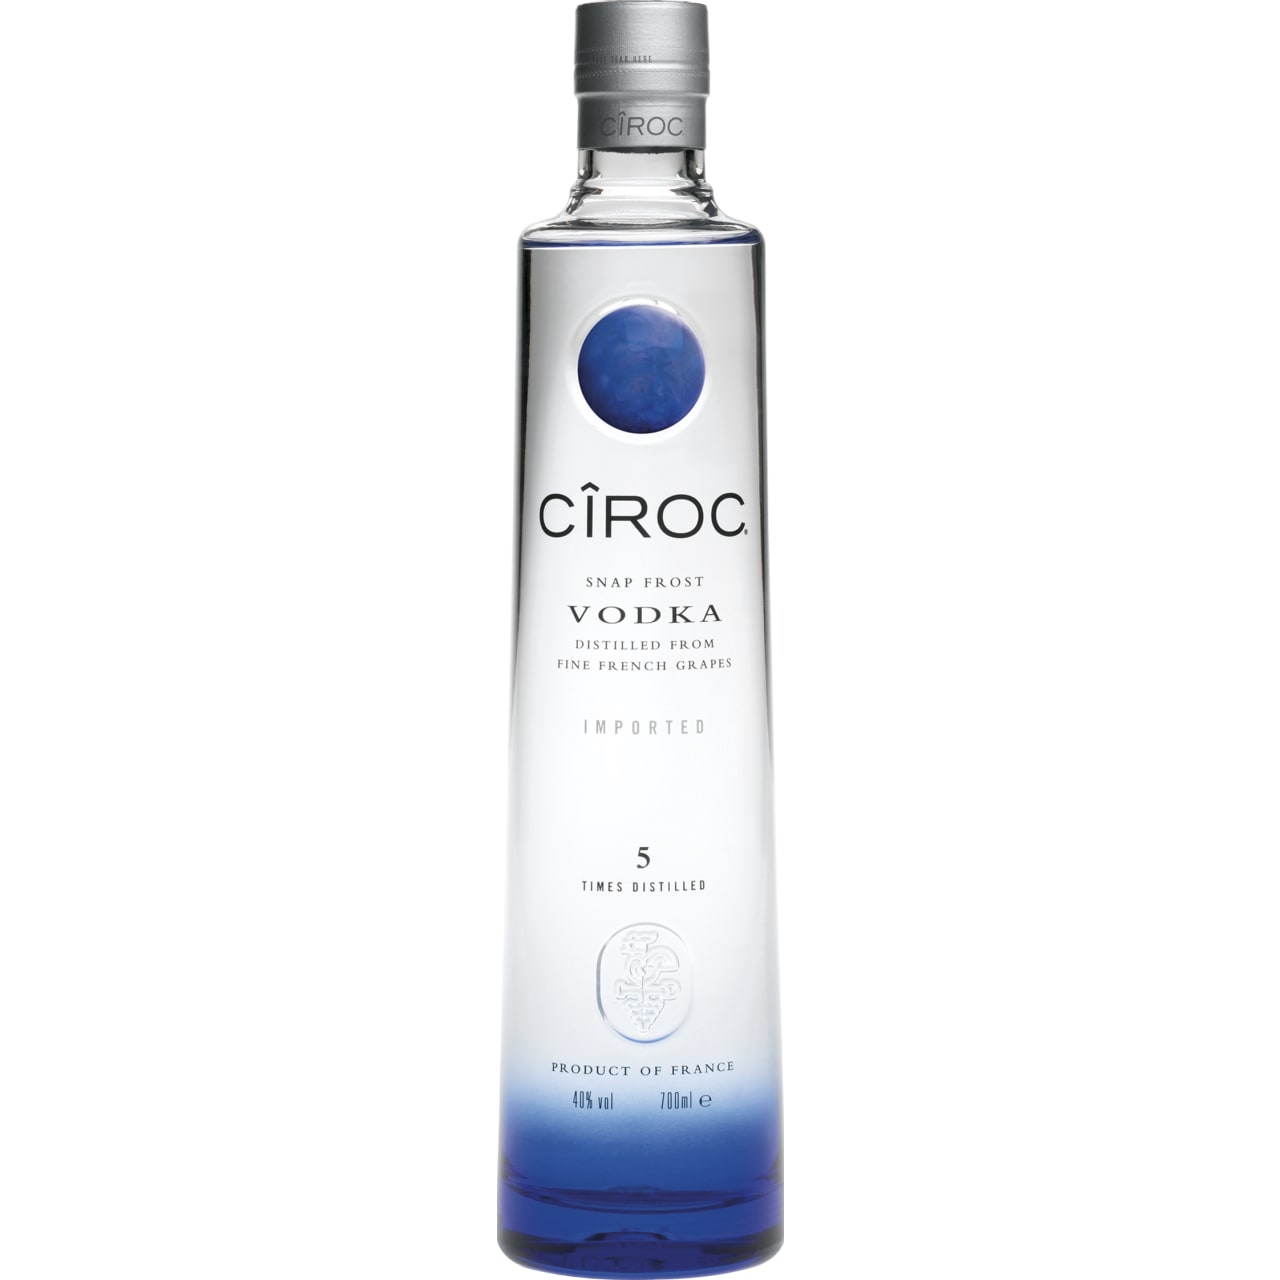 CÎROC is a truly modern vodka, filled with flavour and style.